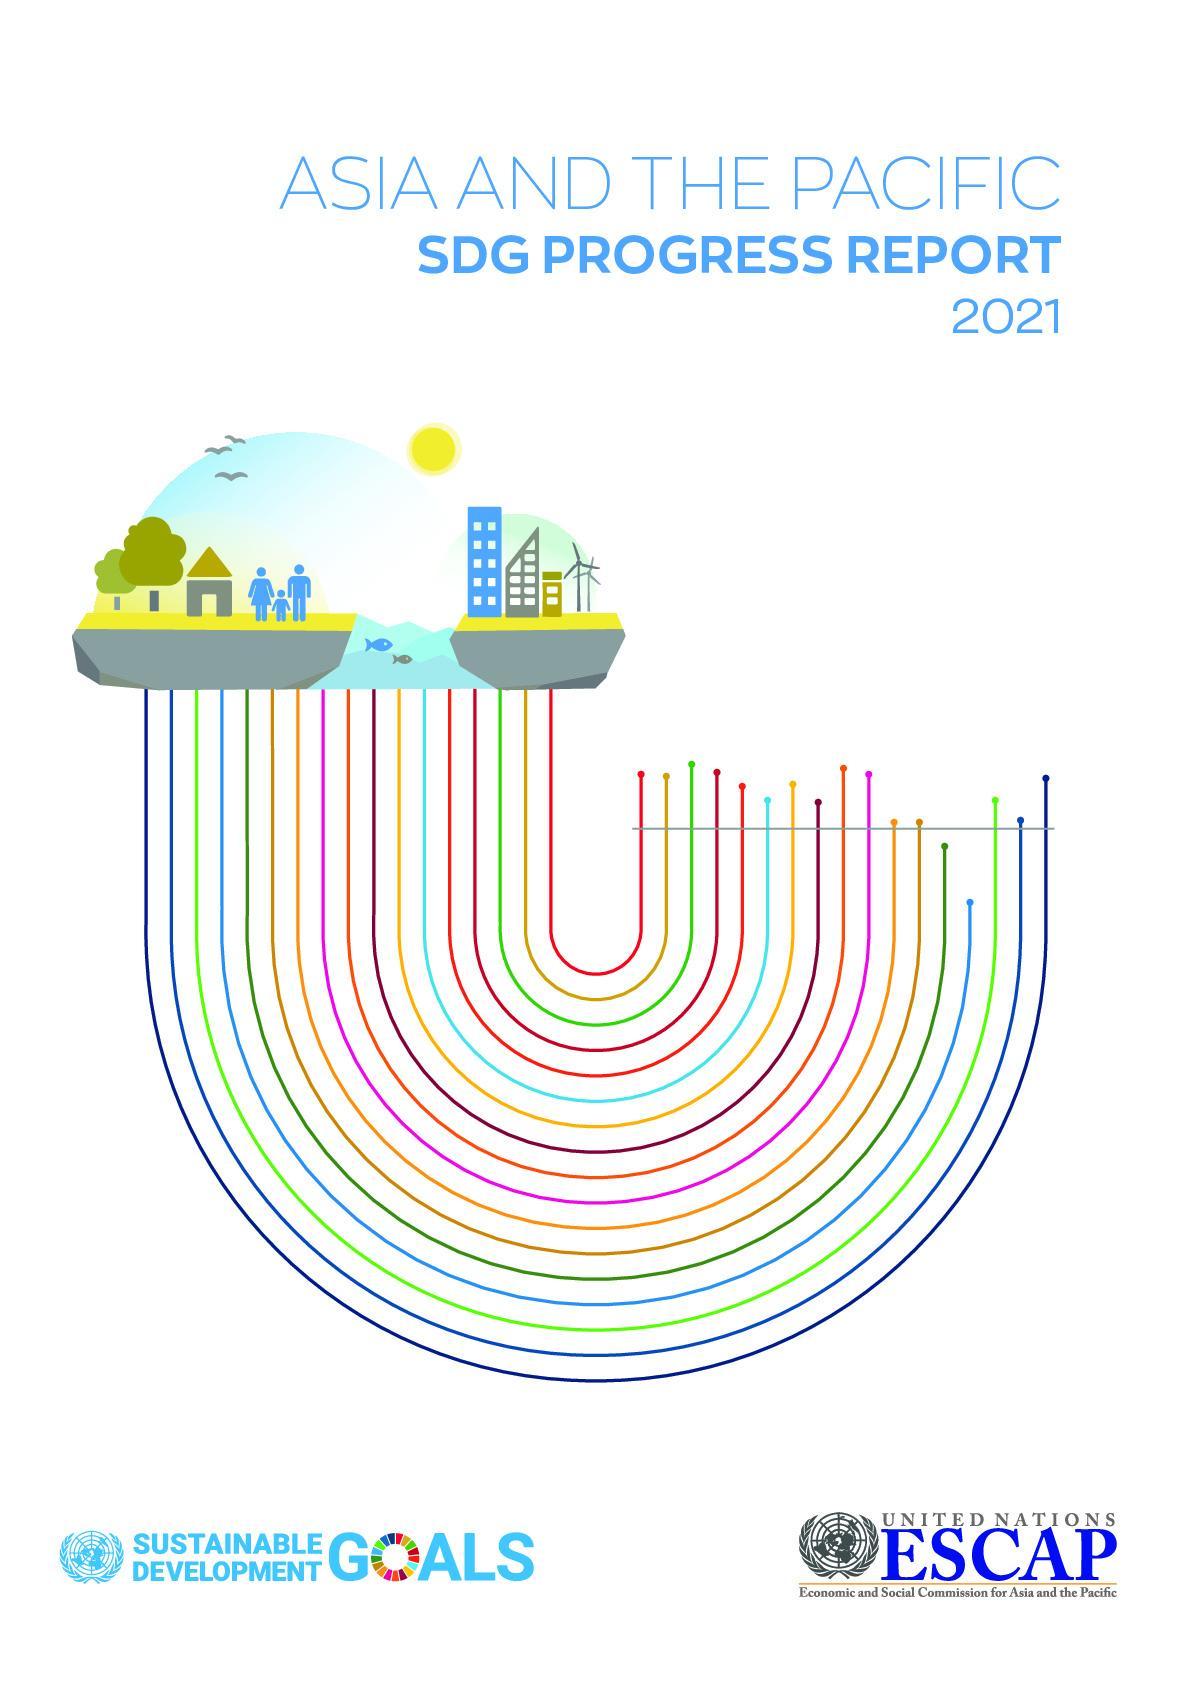 Asia and the Pacific SDG Progress Report 2021